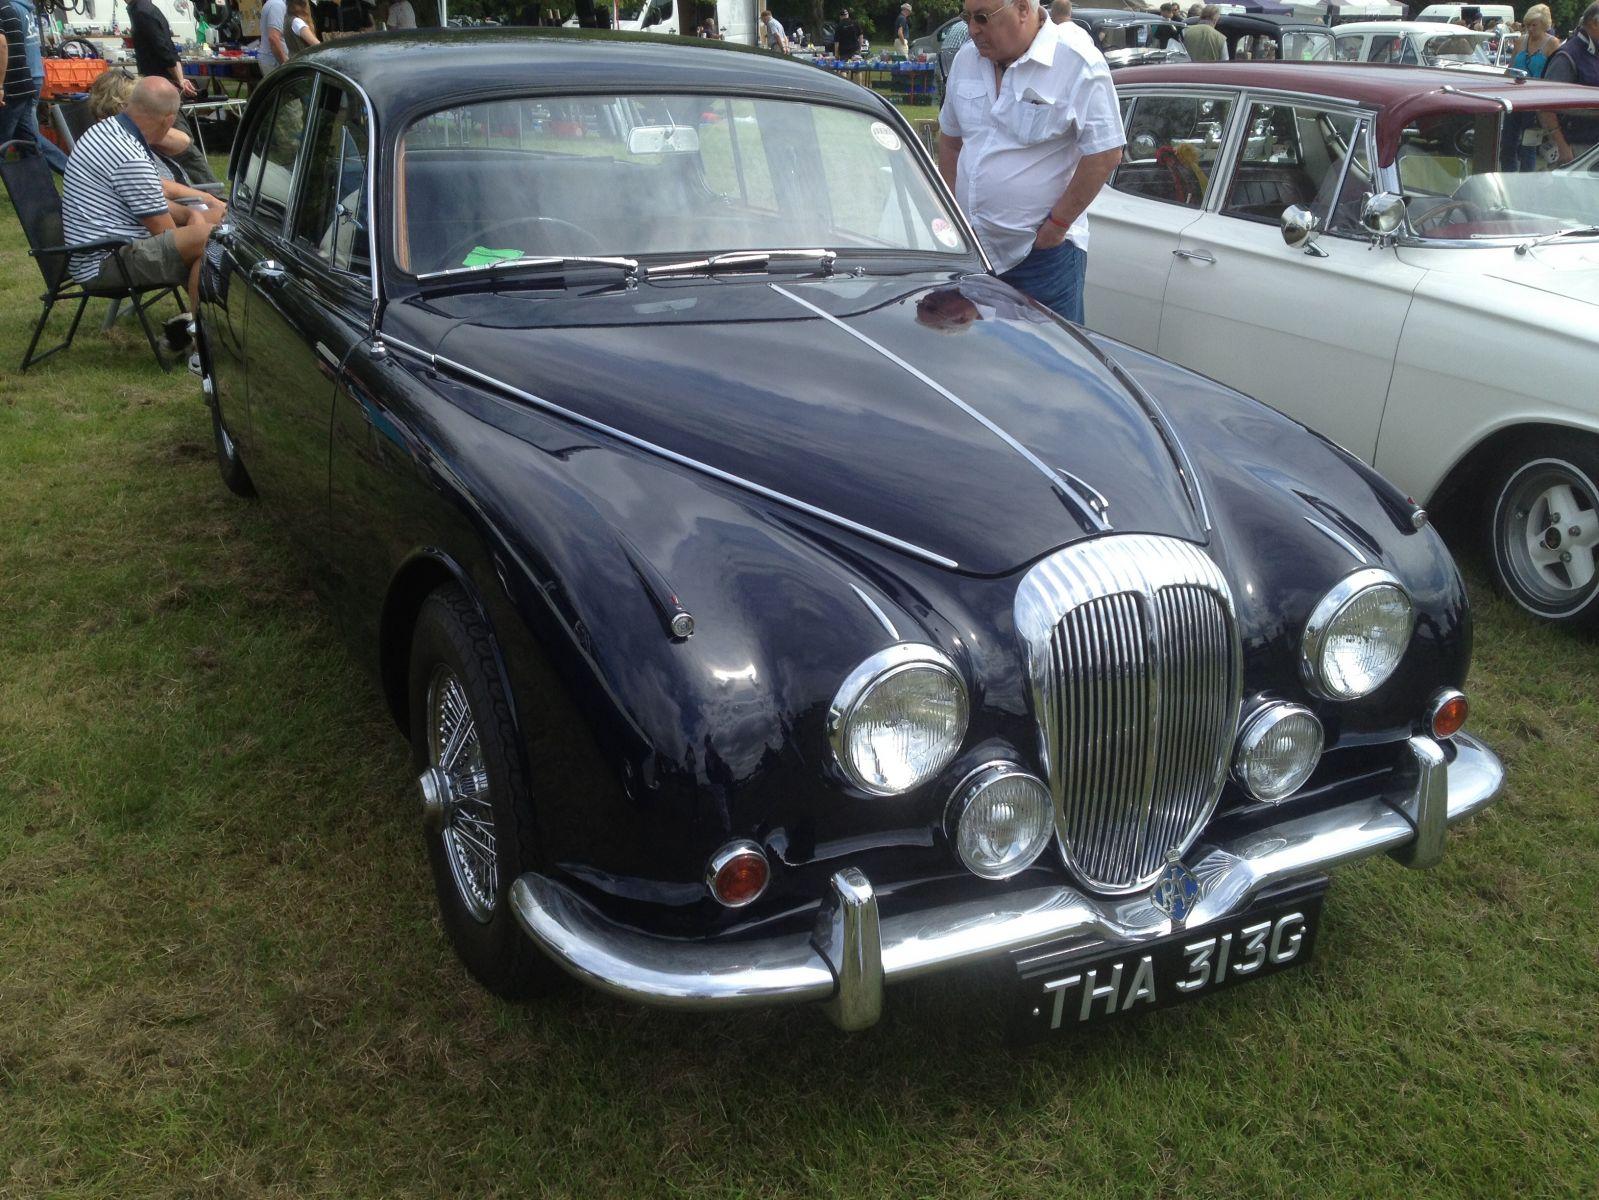 Thorsby classic car show 2013